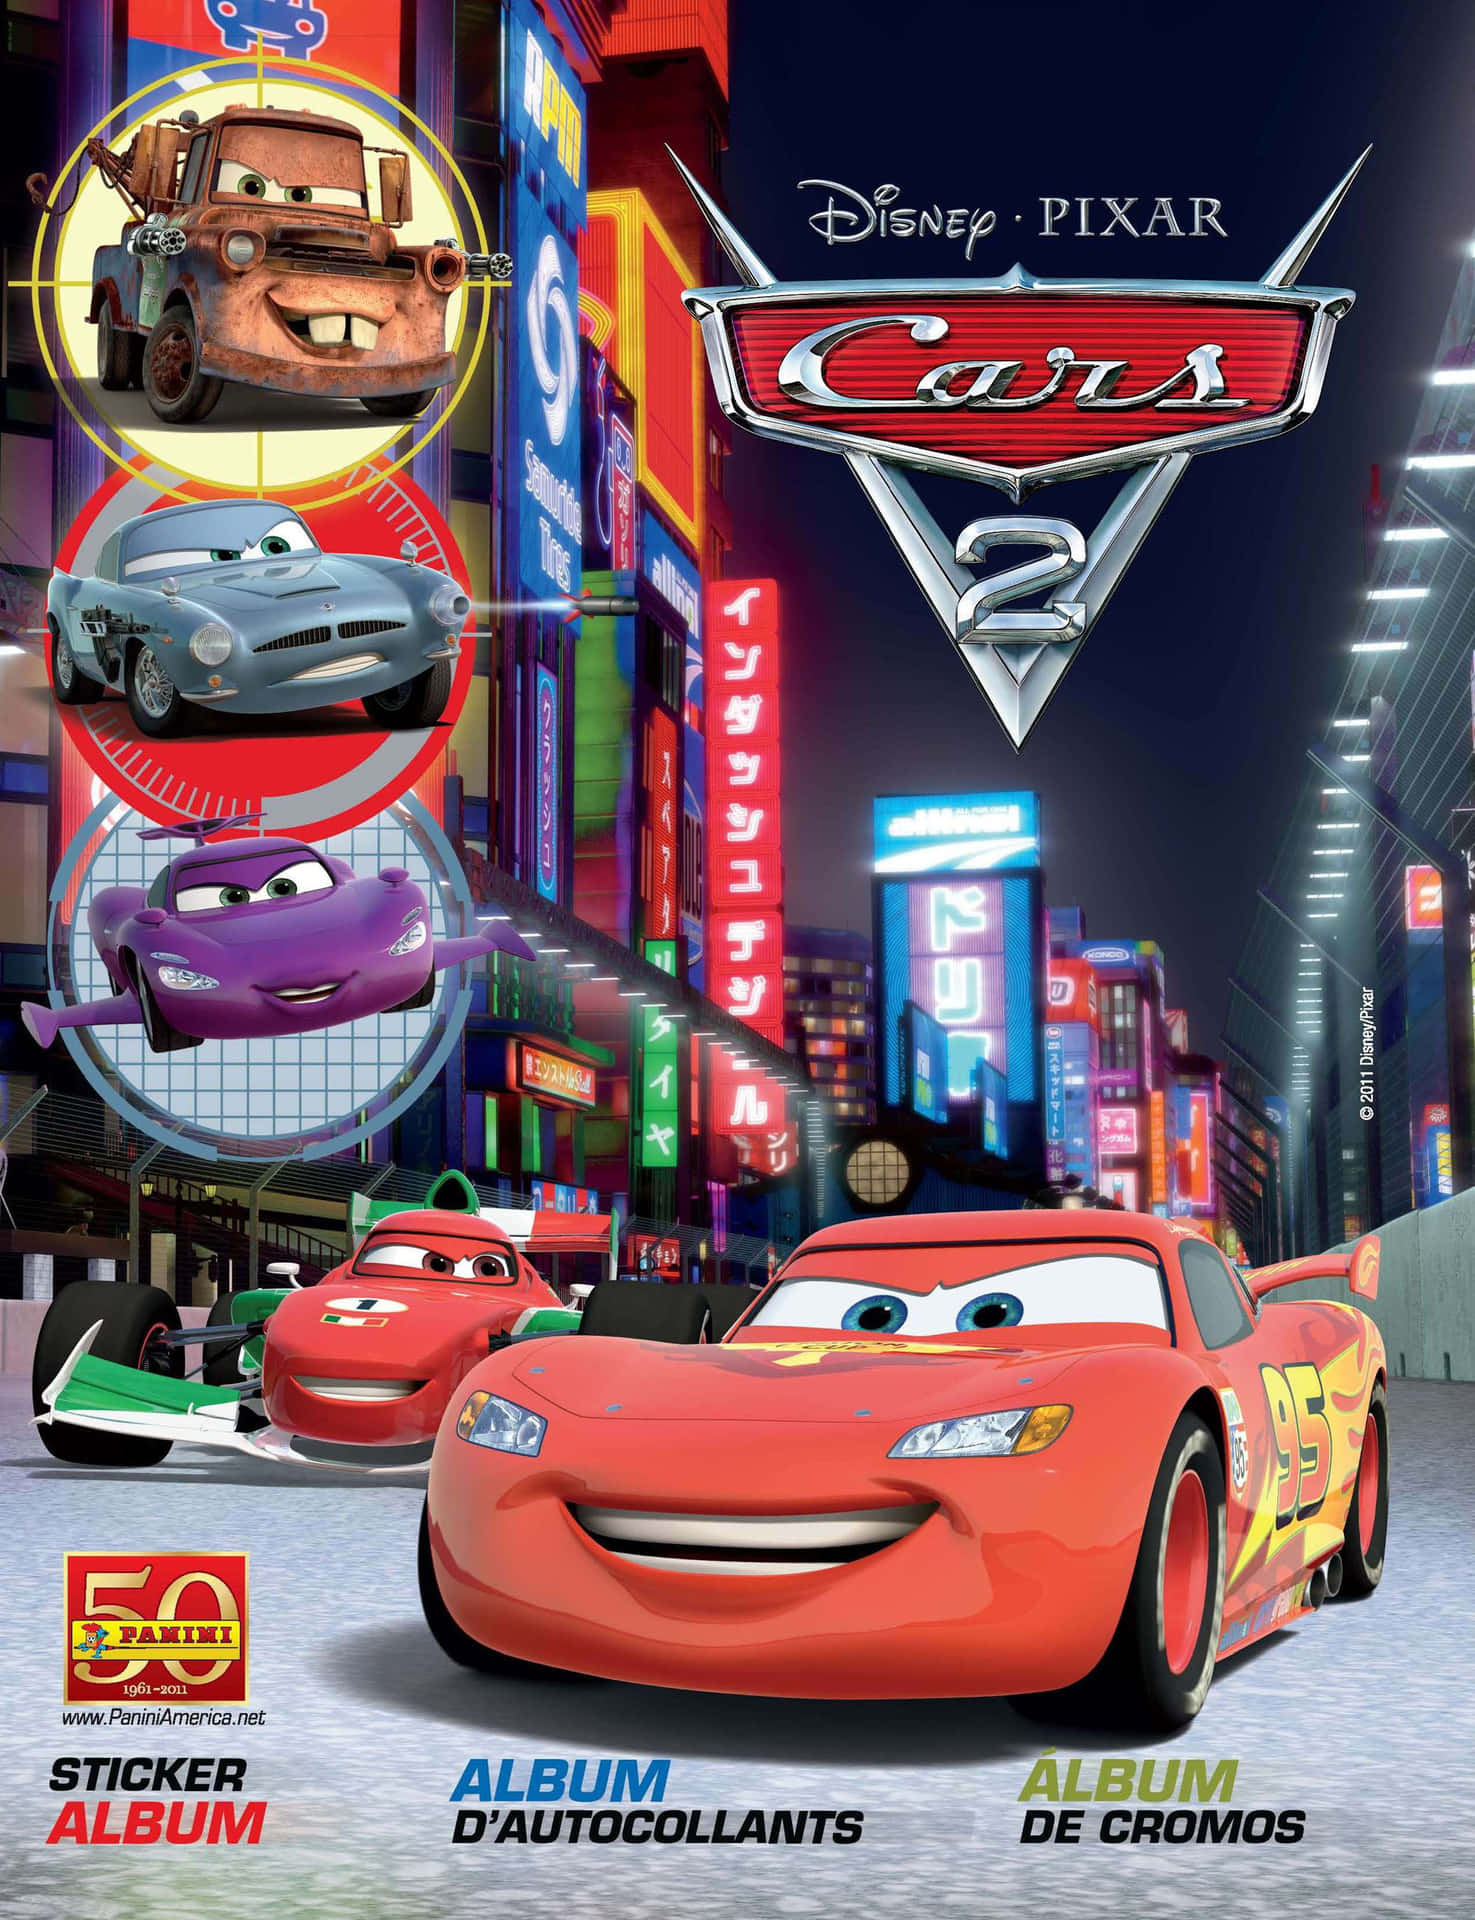 "Turbocharged Performance - Lightning McQueen Races Around The Track In Cars 2!"